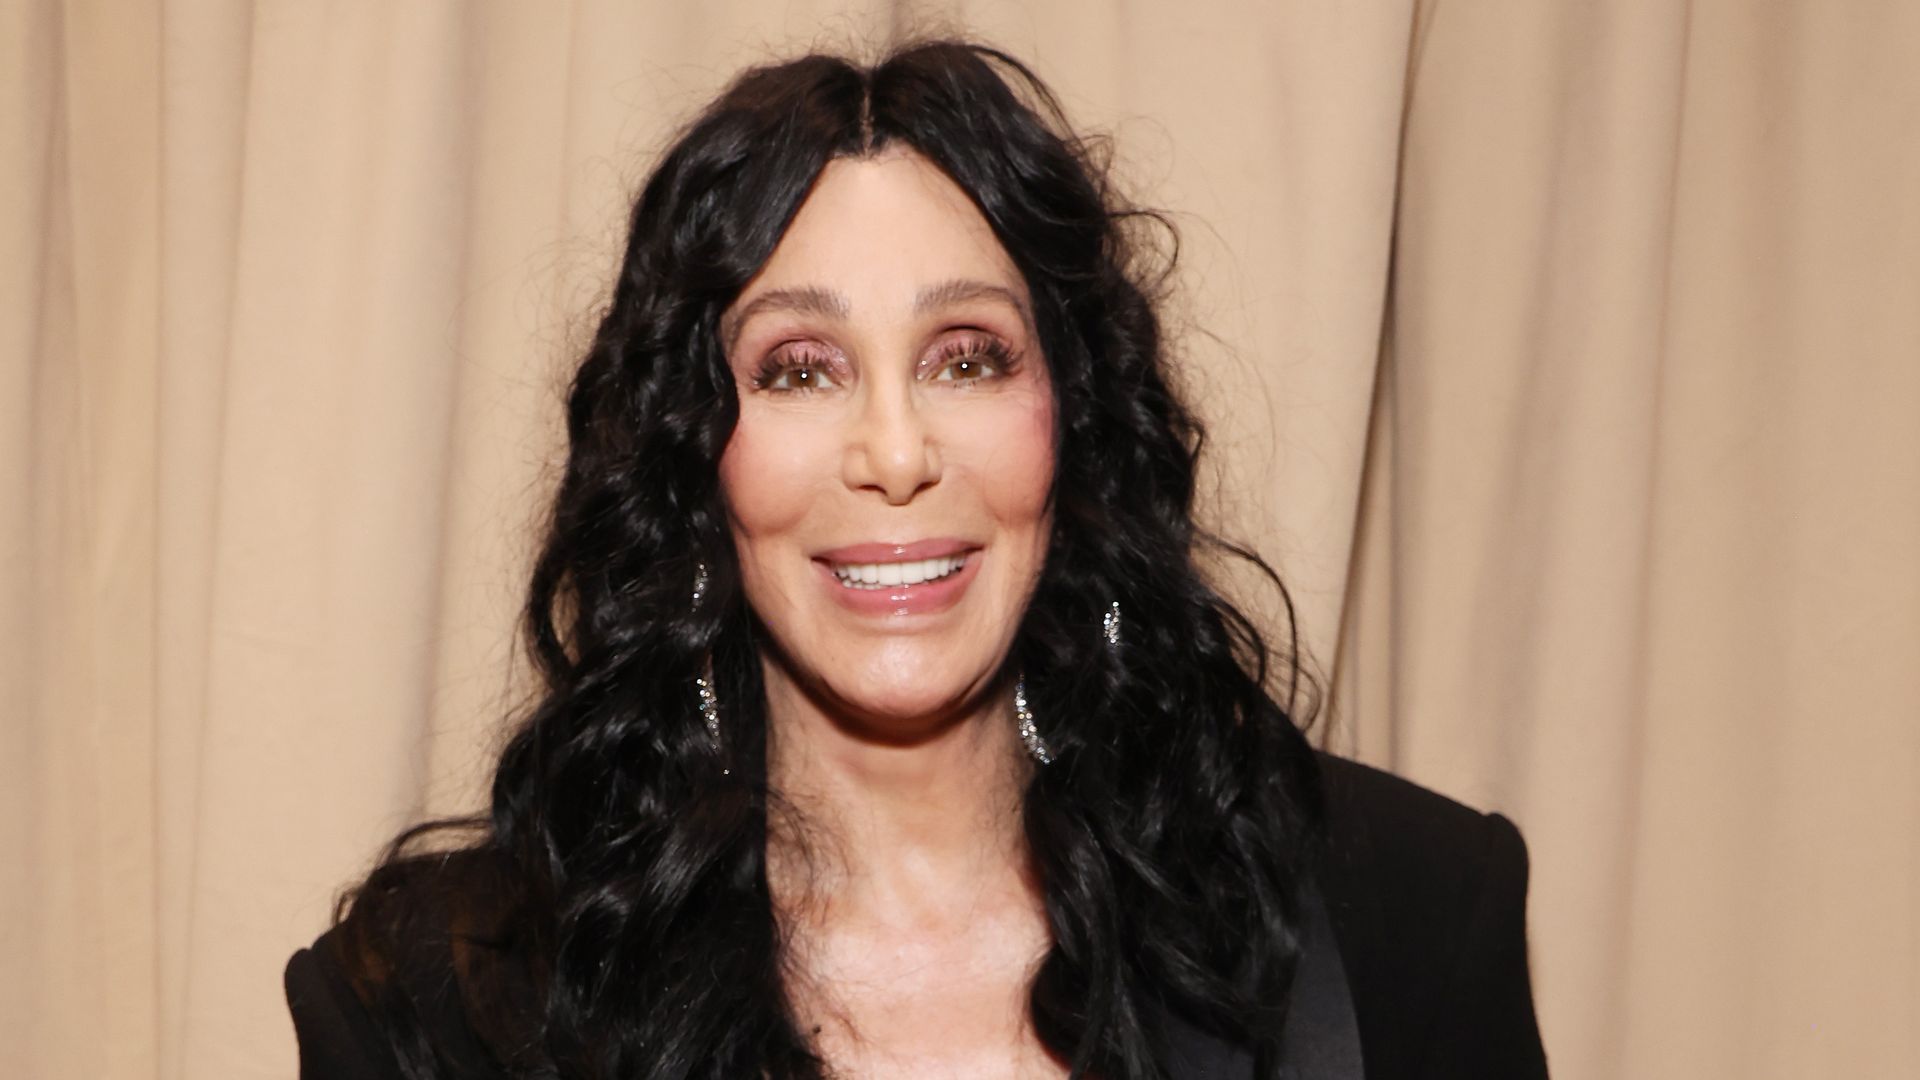 Cher, 77, reveals rock and roll icon she turned down a date with and why she prefers younger men